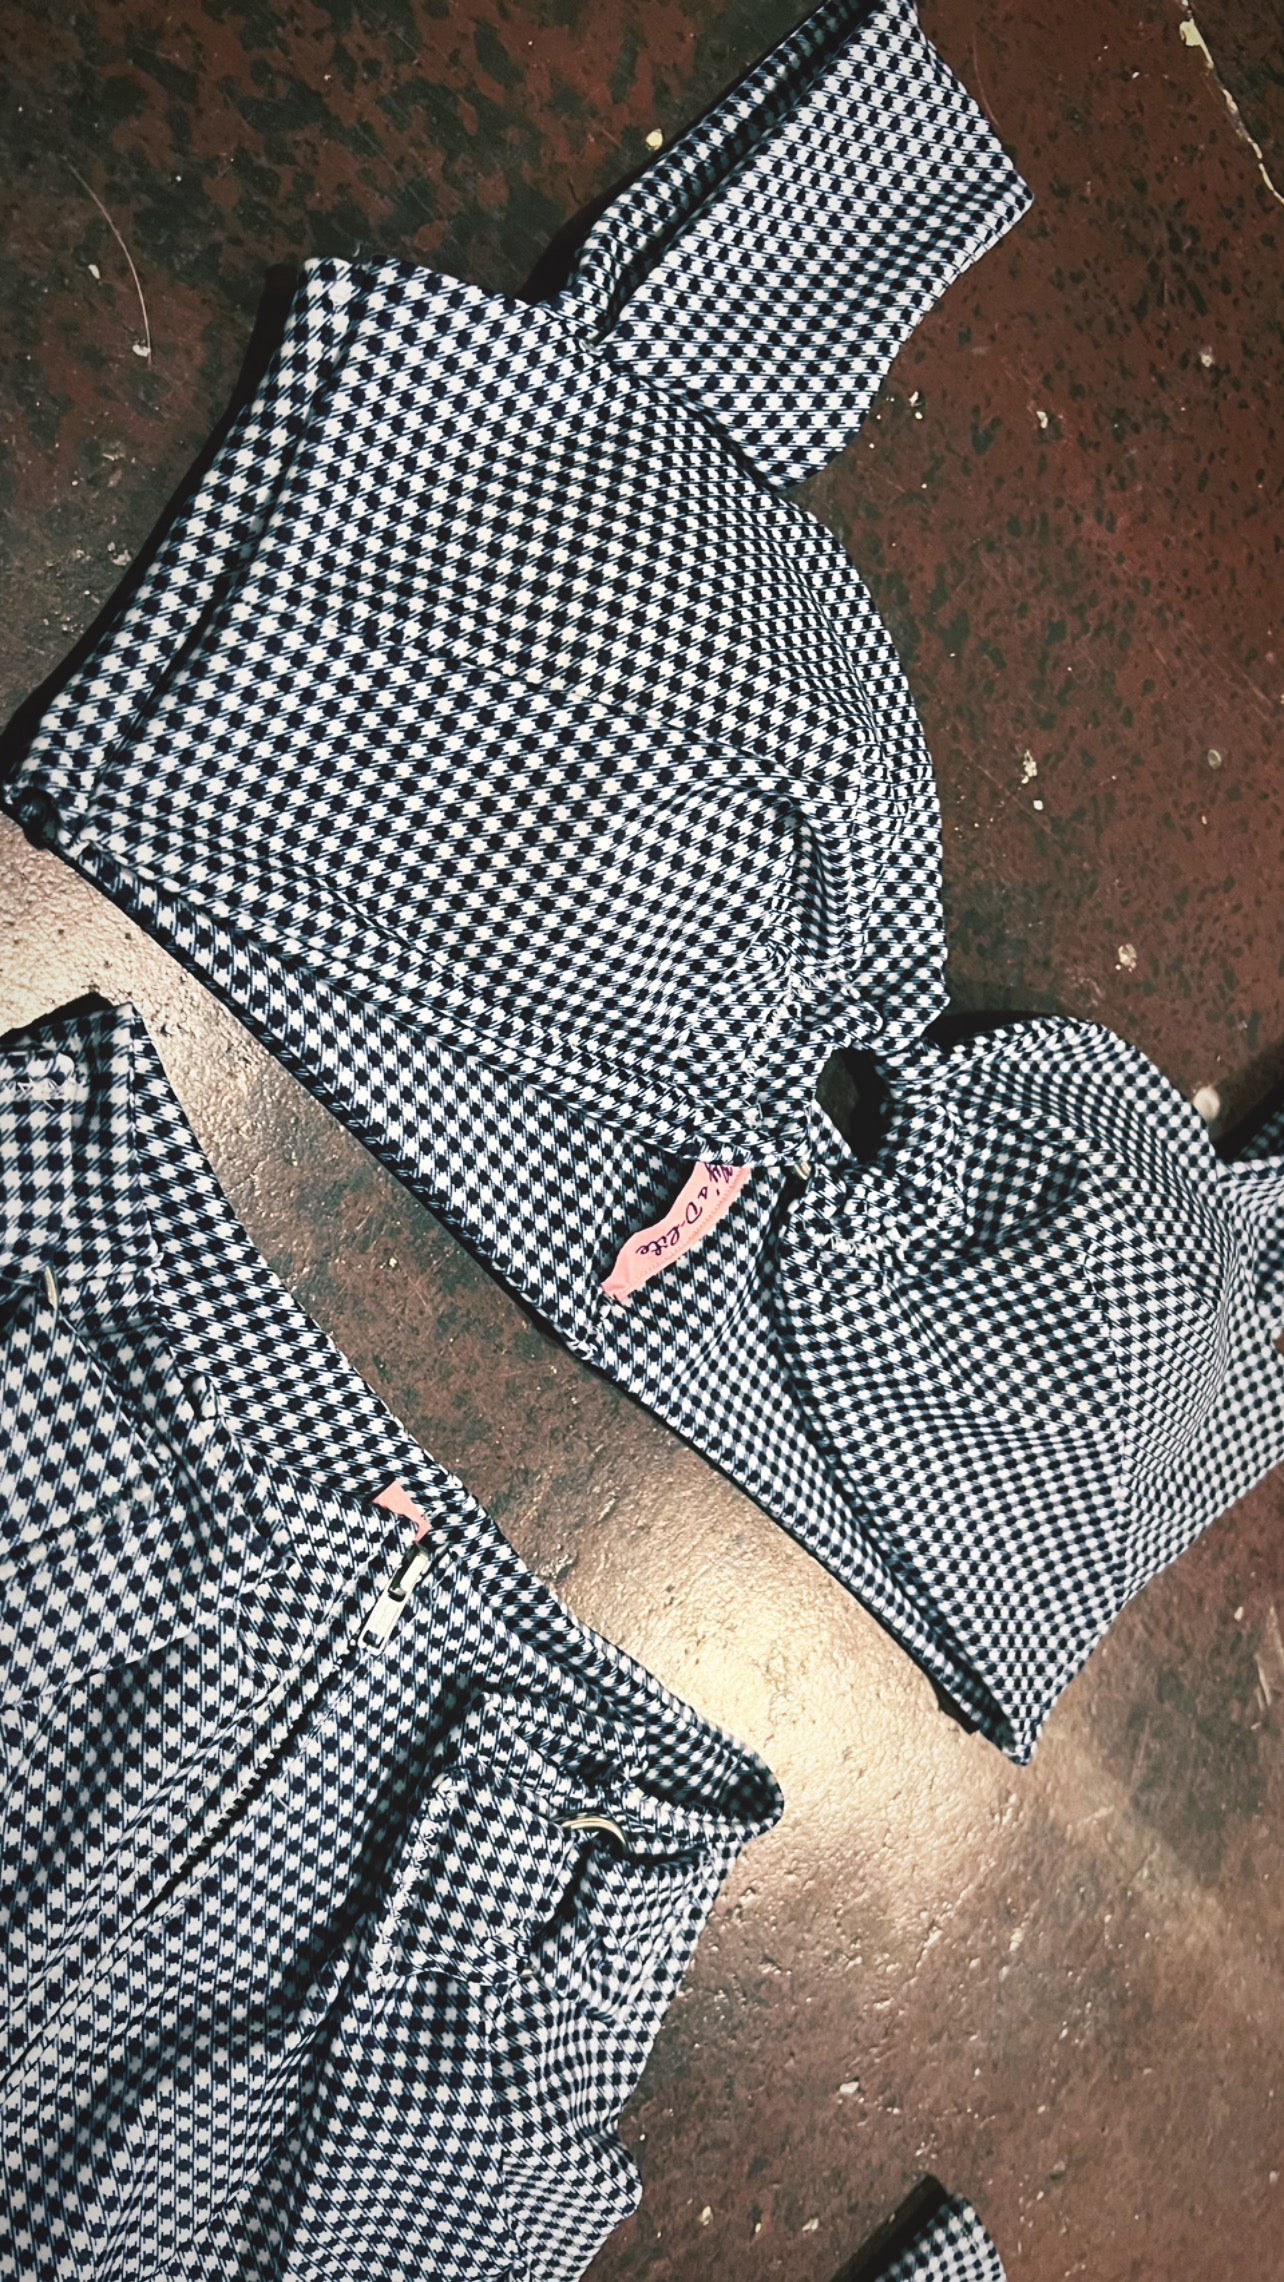 The 'Rowdy' Two Piece Gingham Set